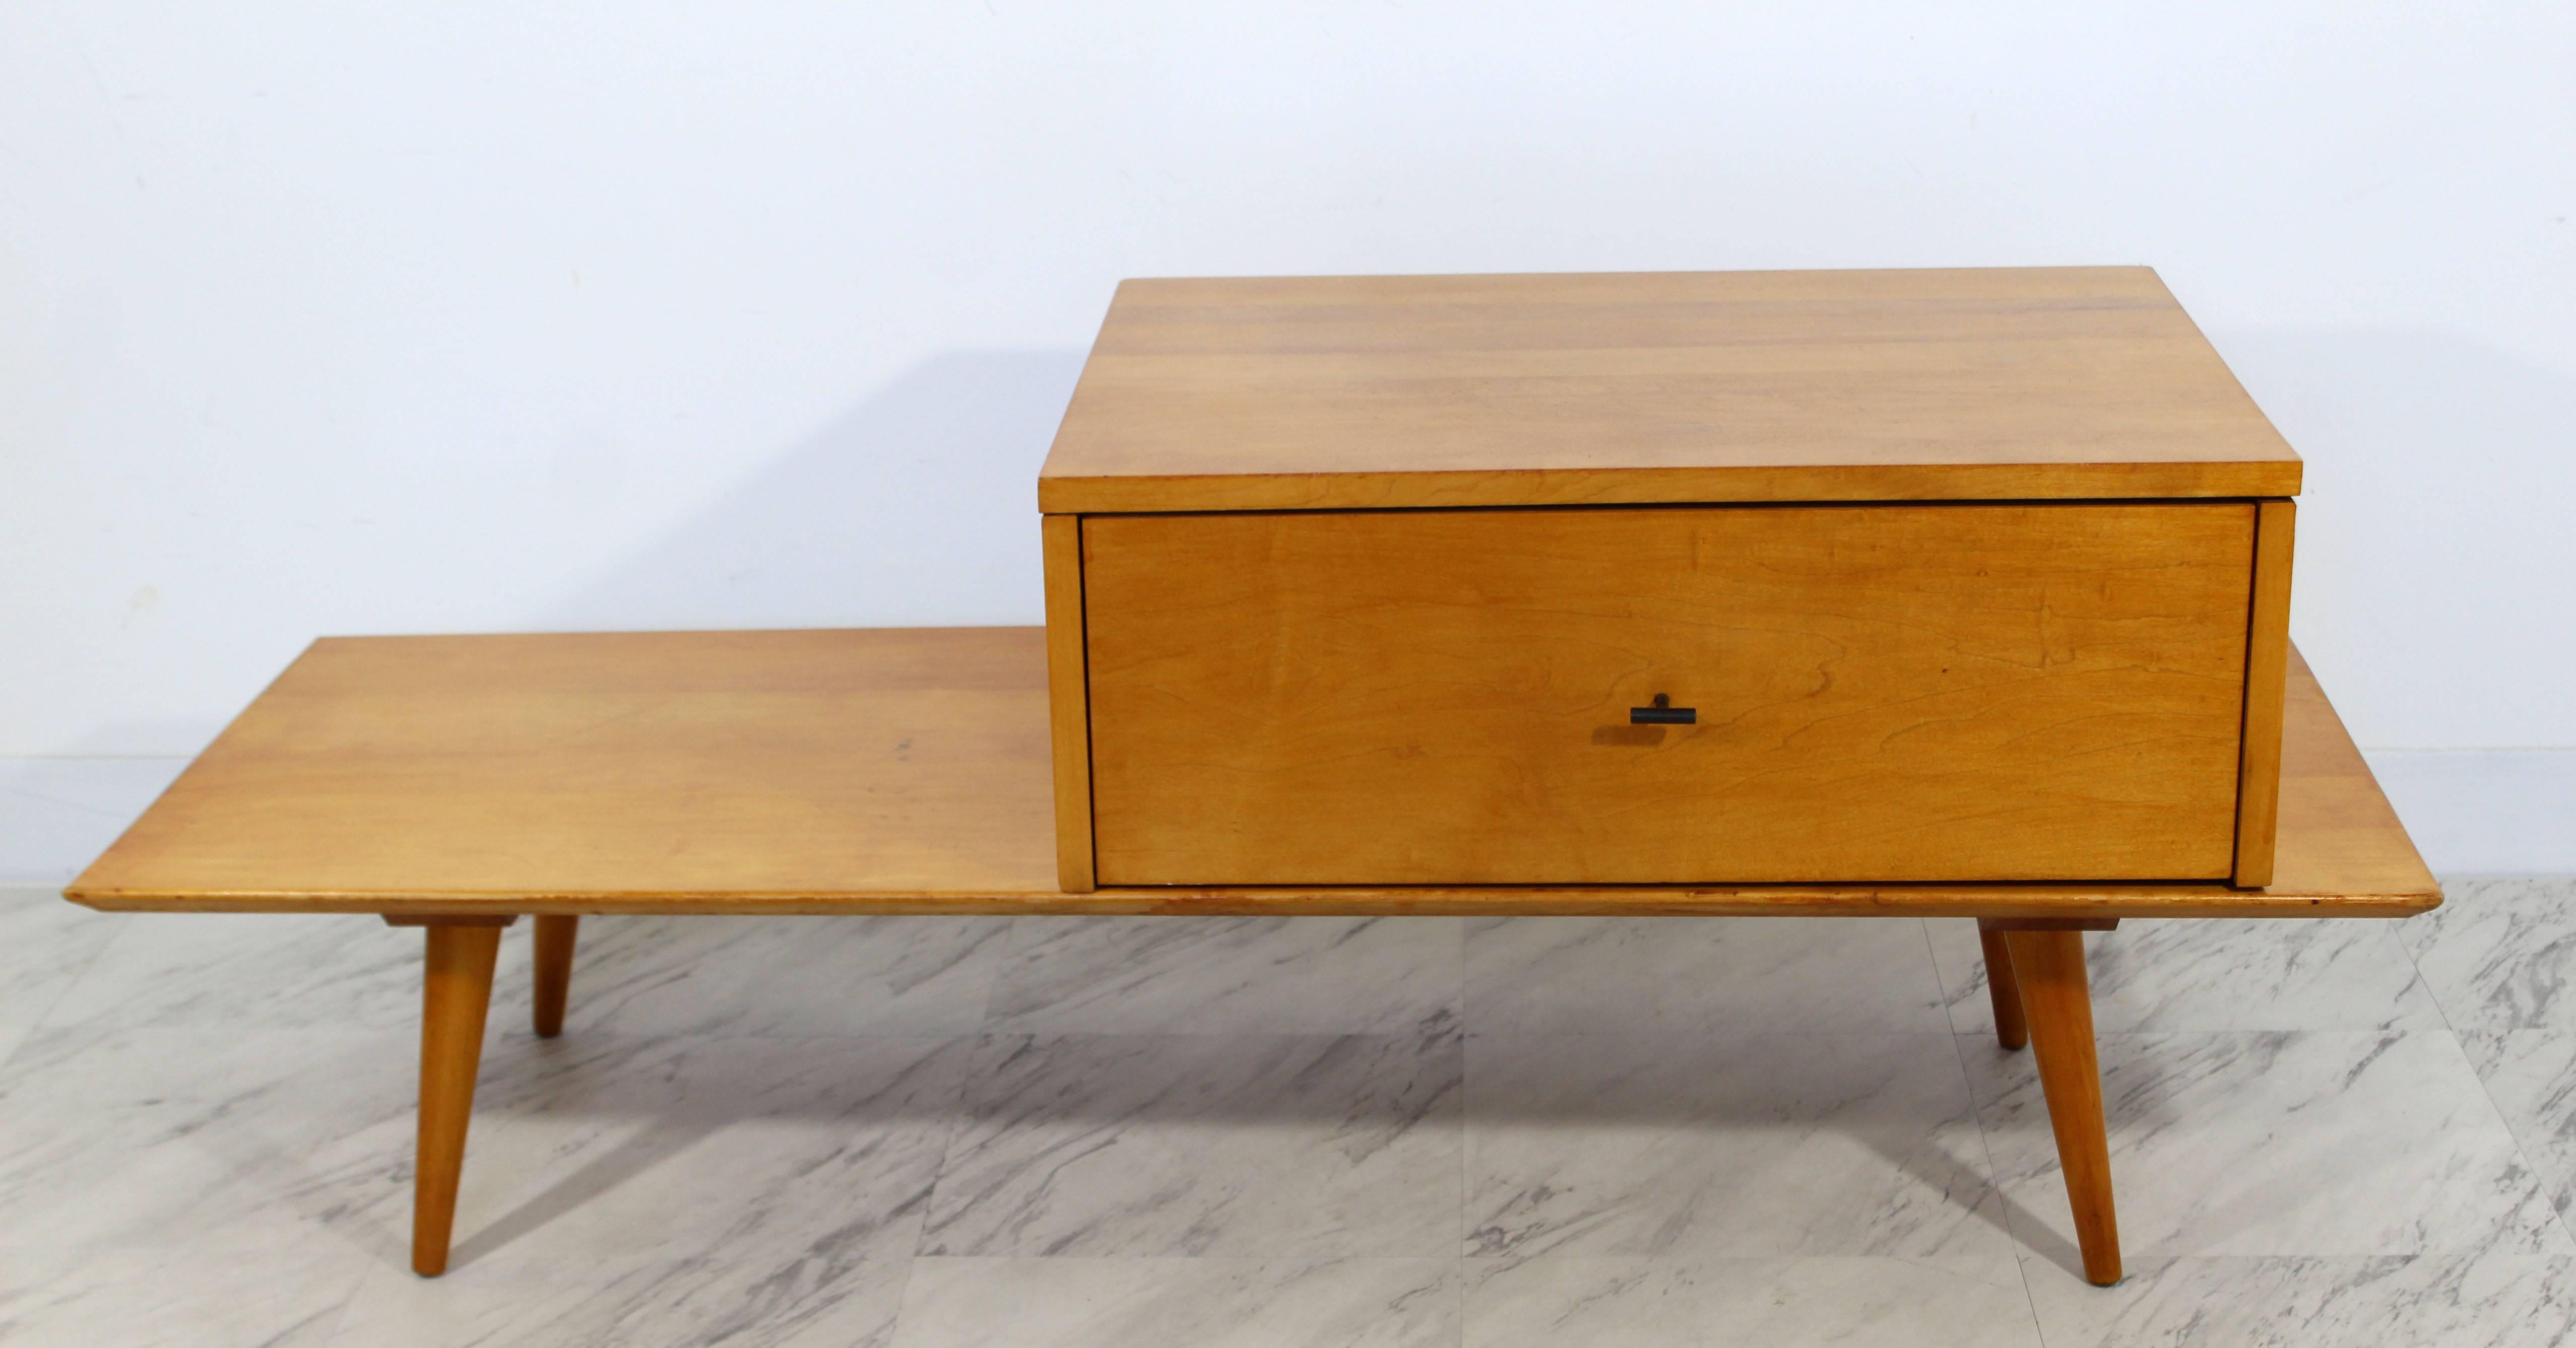 For your consideration is an incredible, coffee table or bench with drawer, made of solid maple and with tapered legs, by Paul McCobb for Winchendon, circa 1960s. In excellent condition. The dimensions of the table are 48